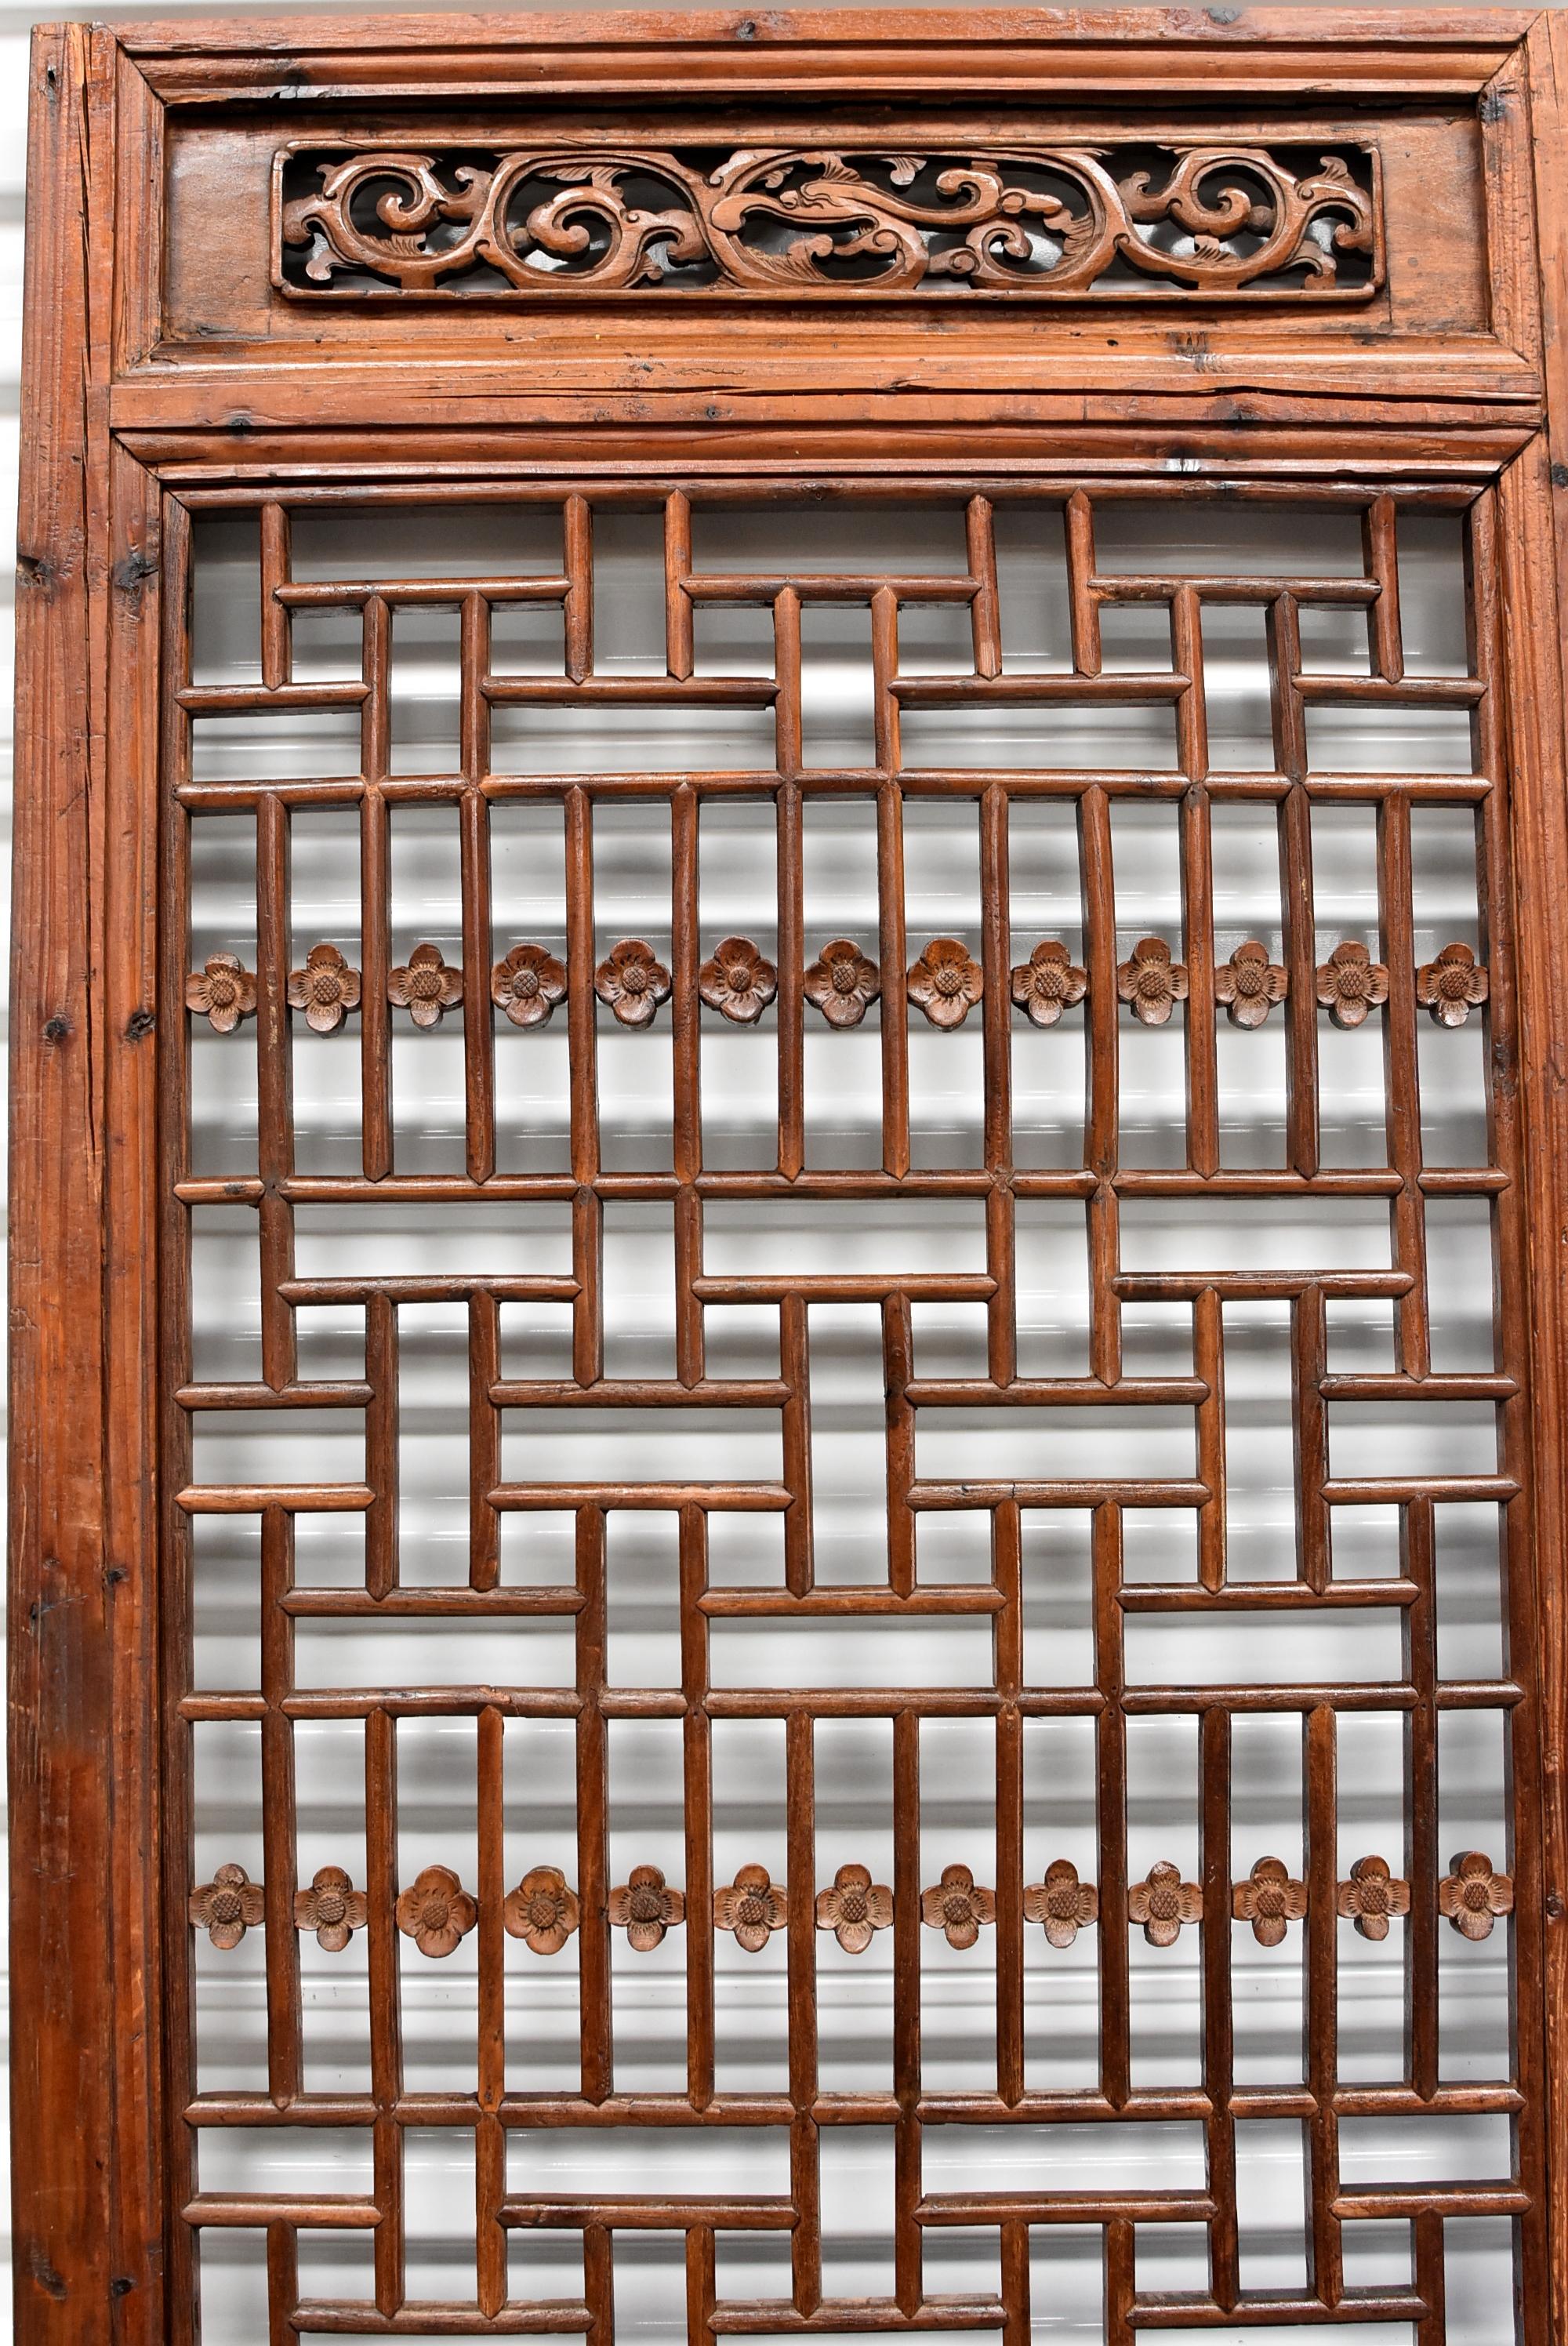 A beautiful single panel 19th century Chinese antique screen featuring carved plum blossoms with a geometric lattice design. The openwork is a connection of curved cuts of wood joined together by tenons and mortises. The top of the screen features a